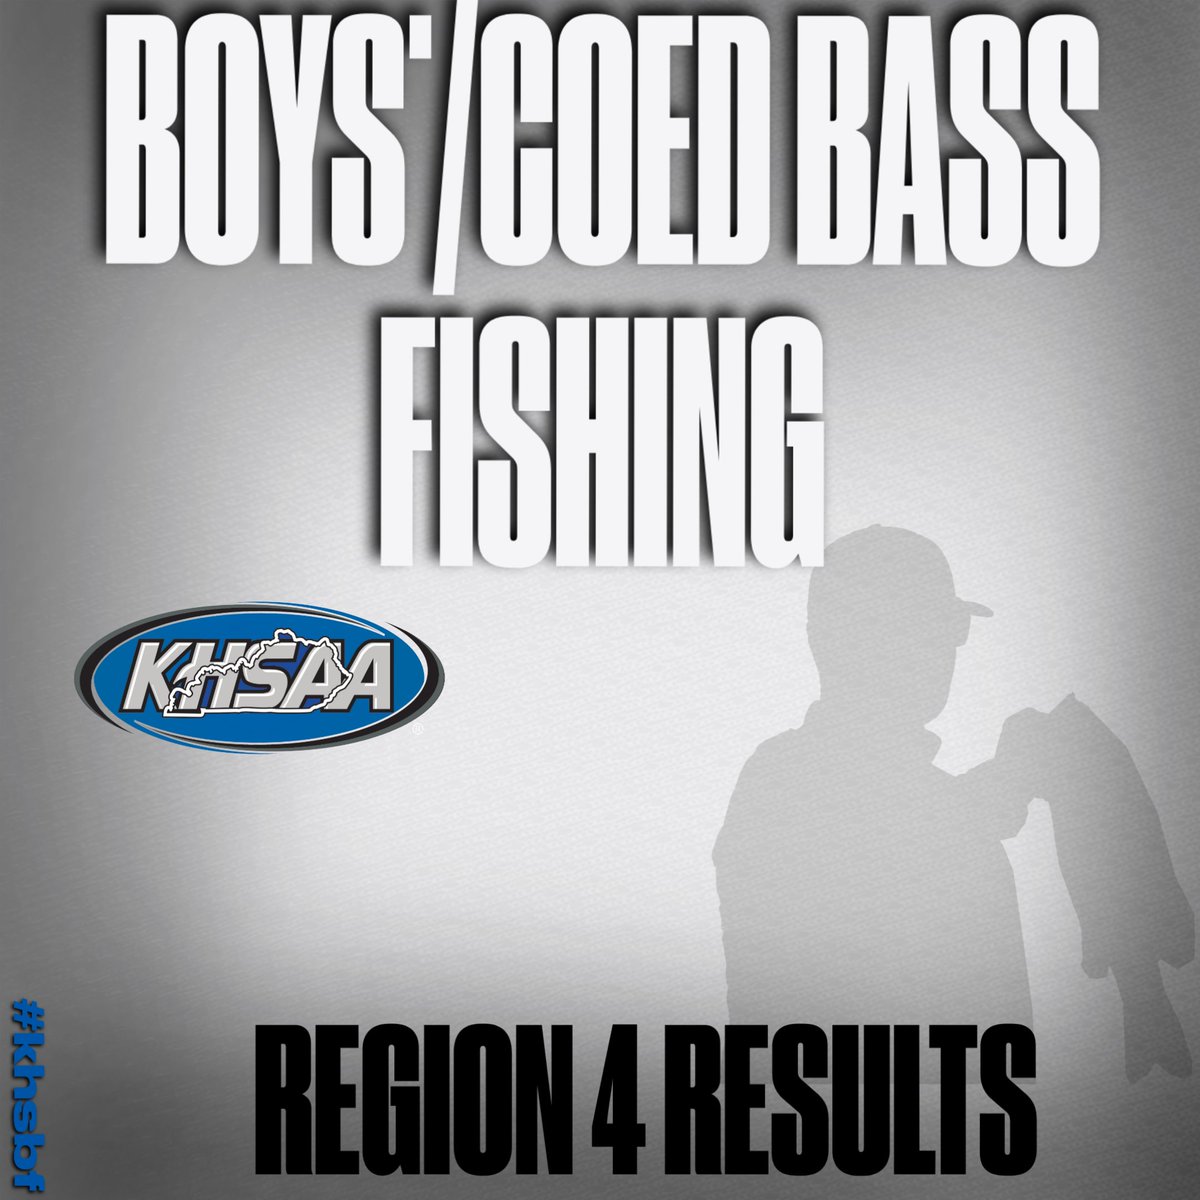 Check out Boys'/Coed Bass Fishing Region 4 results: khsaa.org/bassfishing/20…